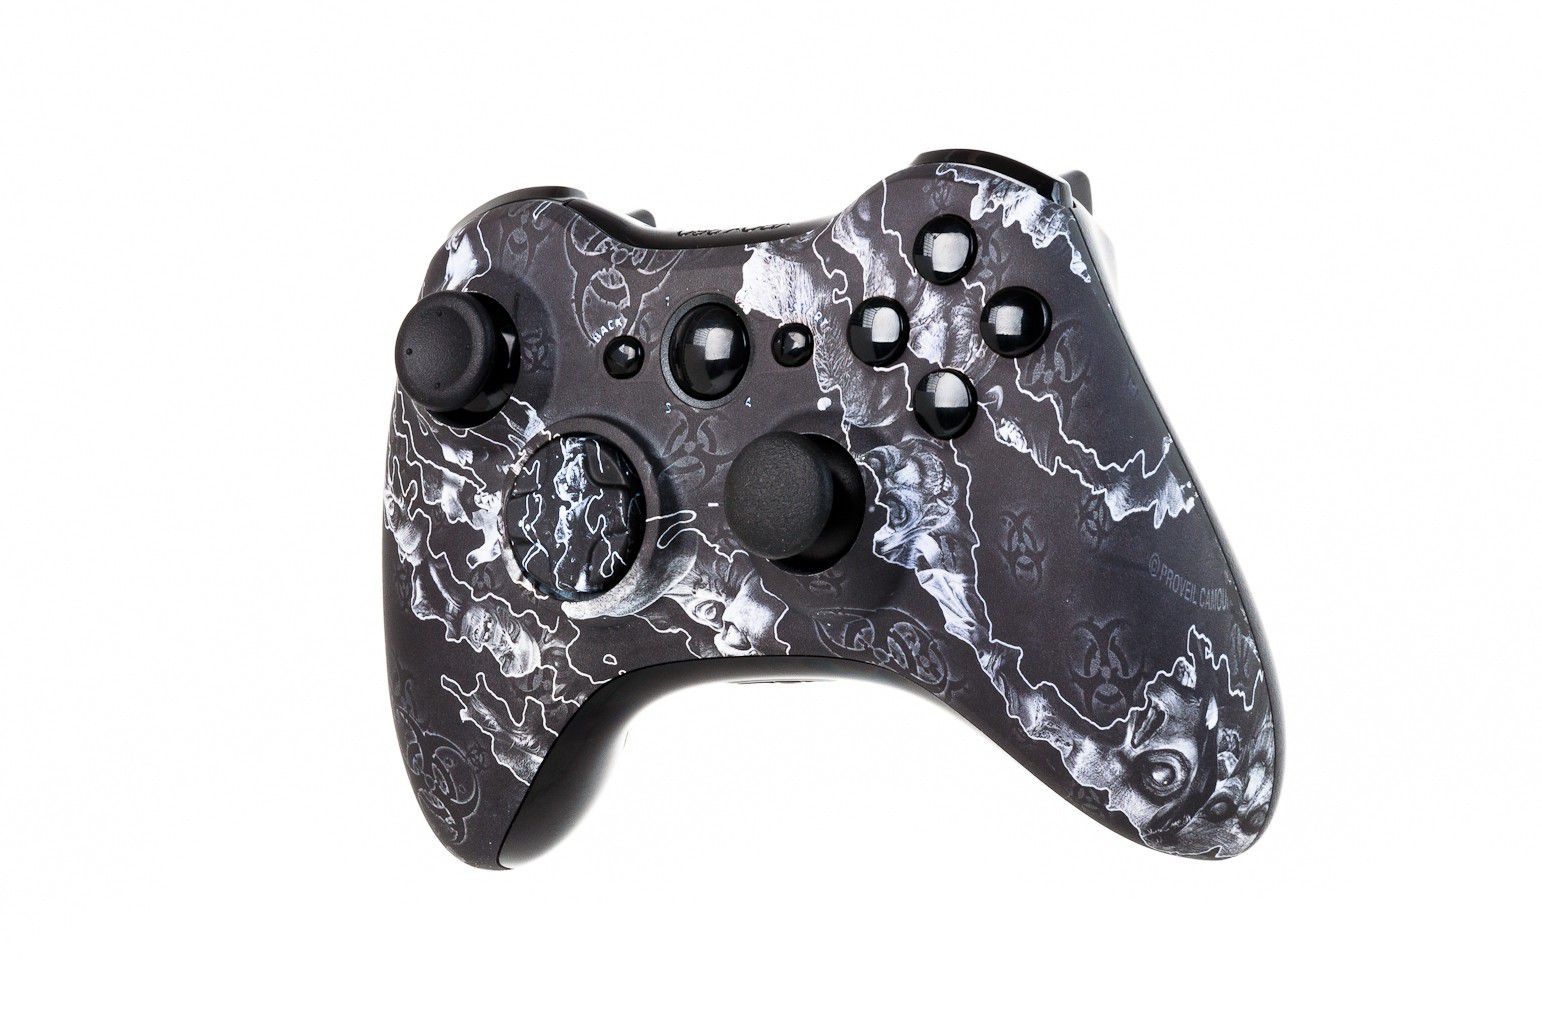 Scuf_Gaming_Radioactive_Zombie_Stealth_Gamer-GNT_a